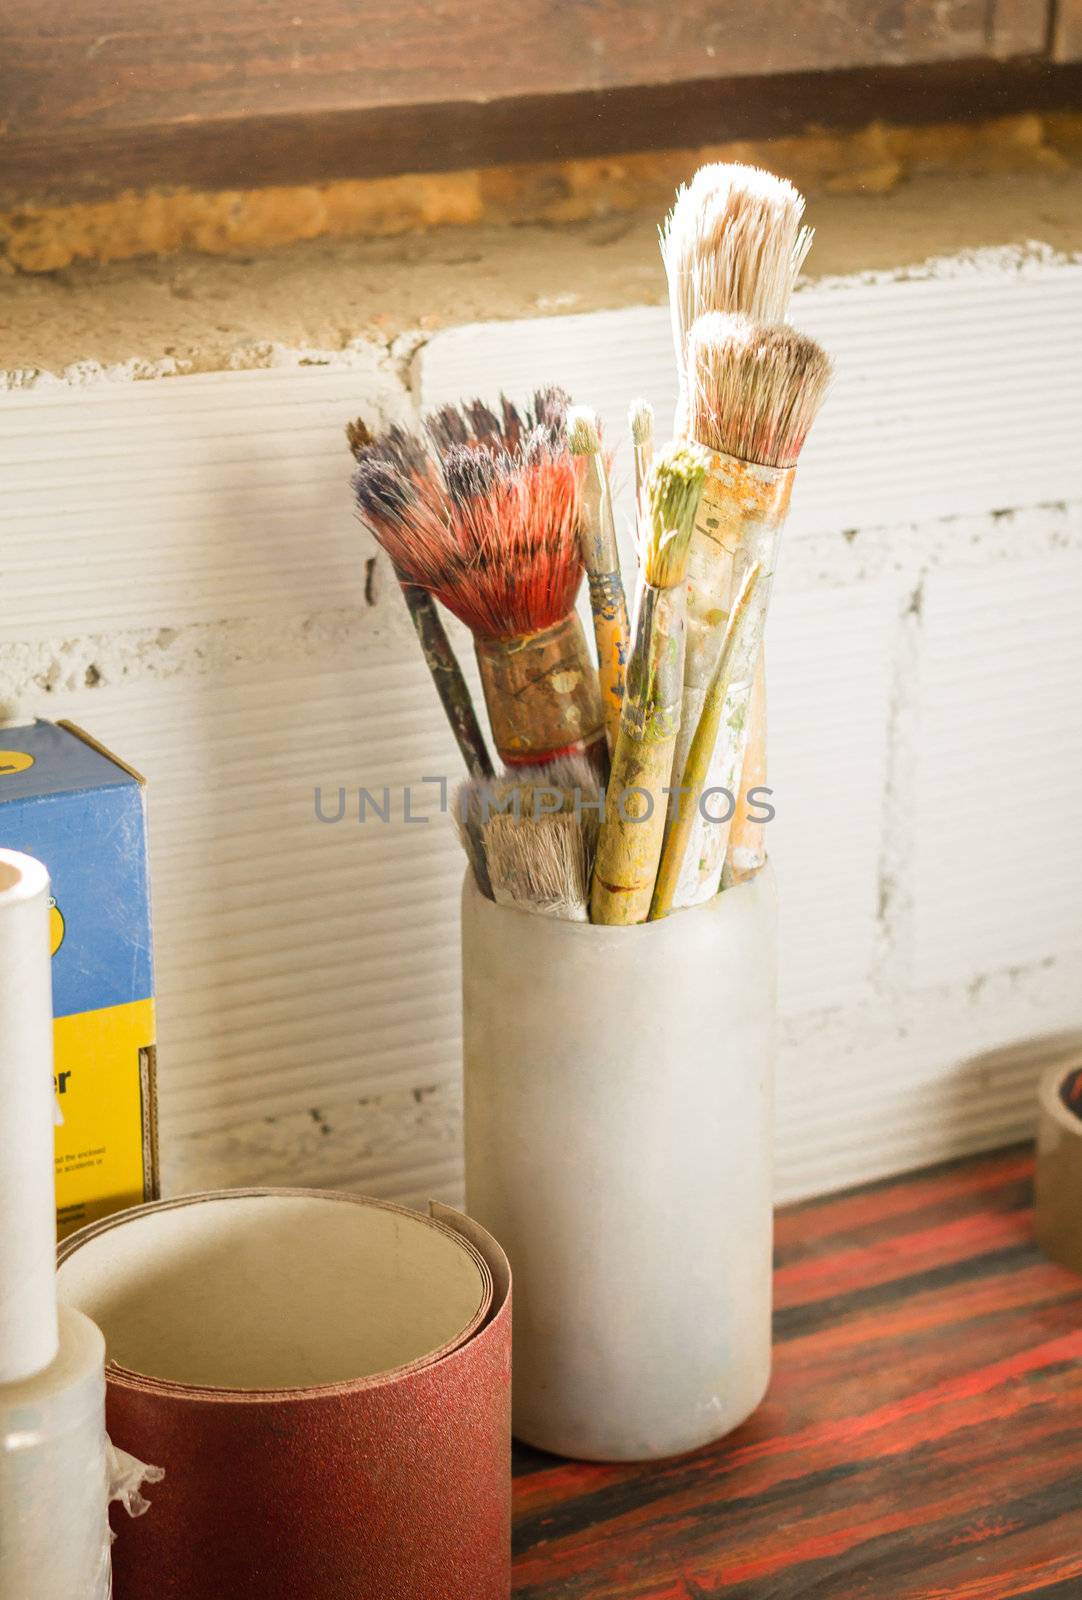 Set of paint brushes on jar, in a artistic red table